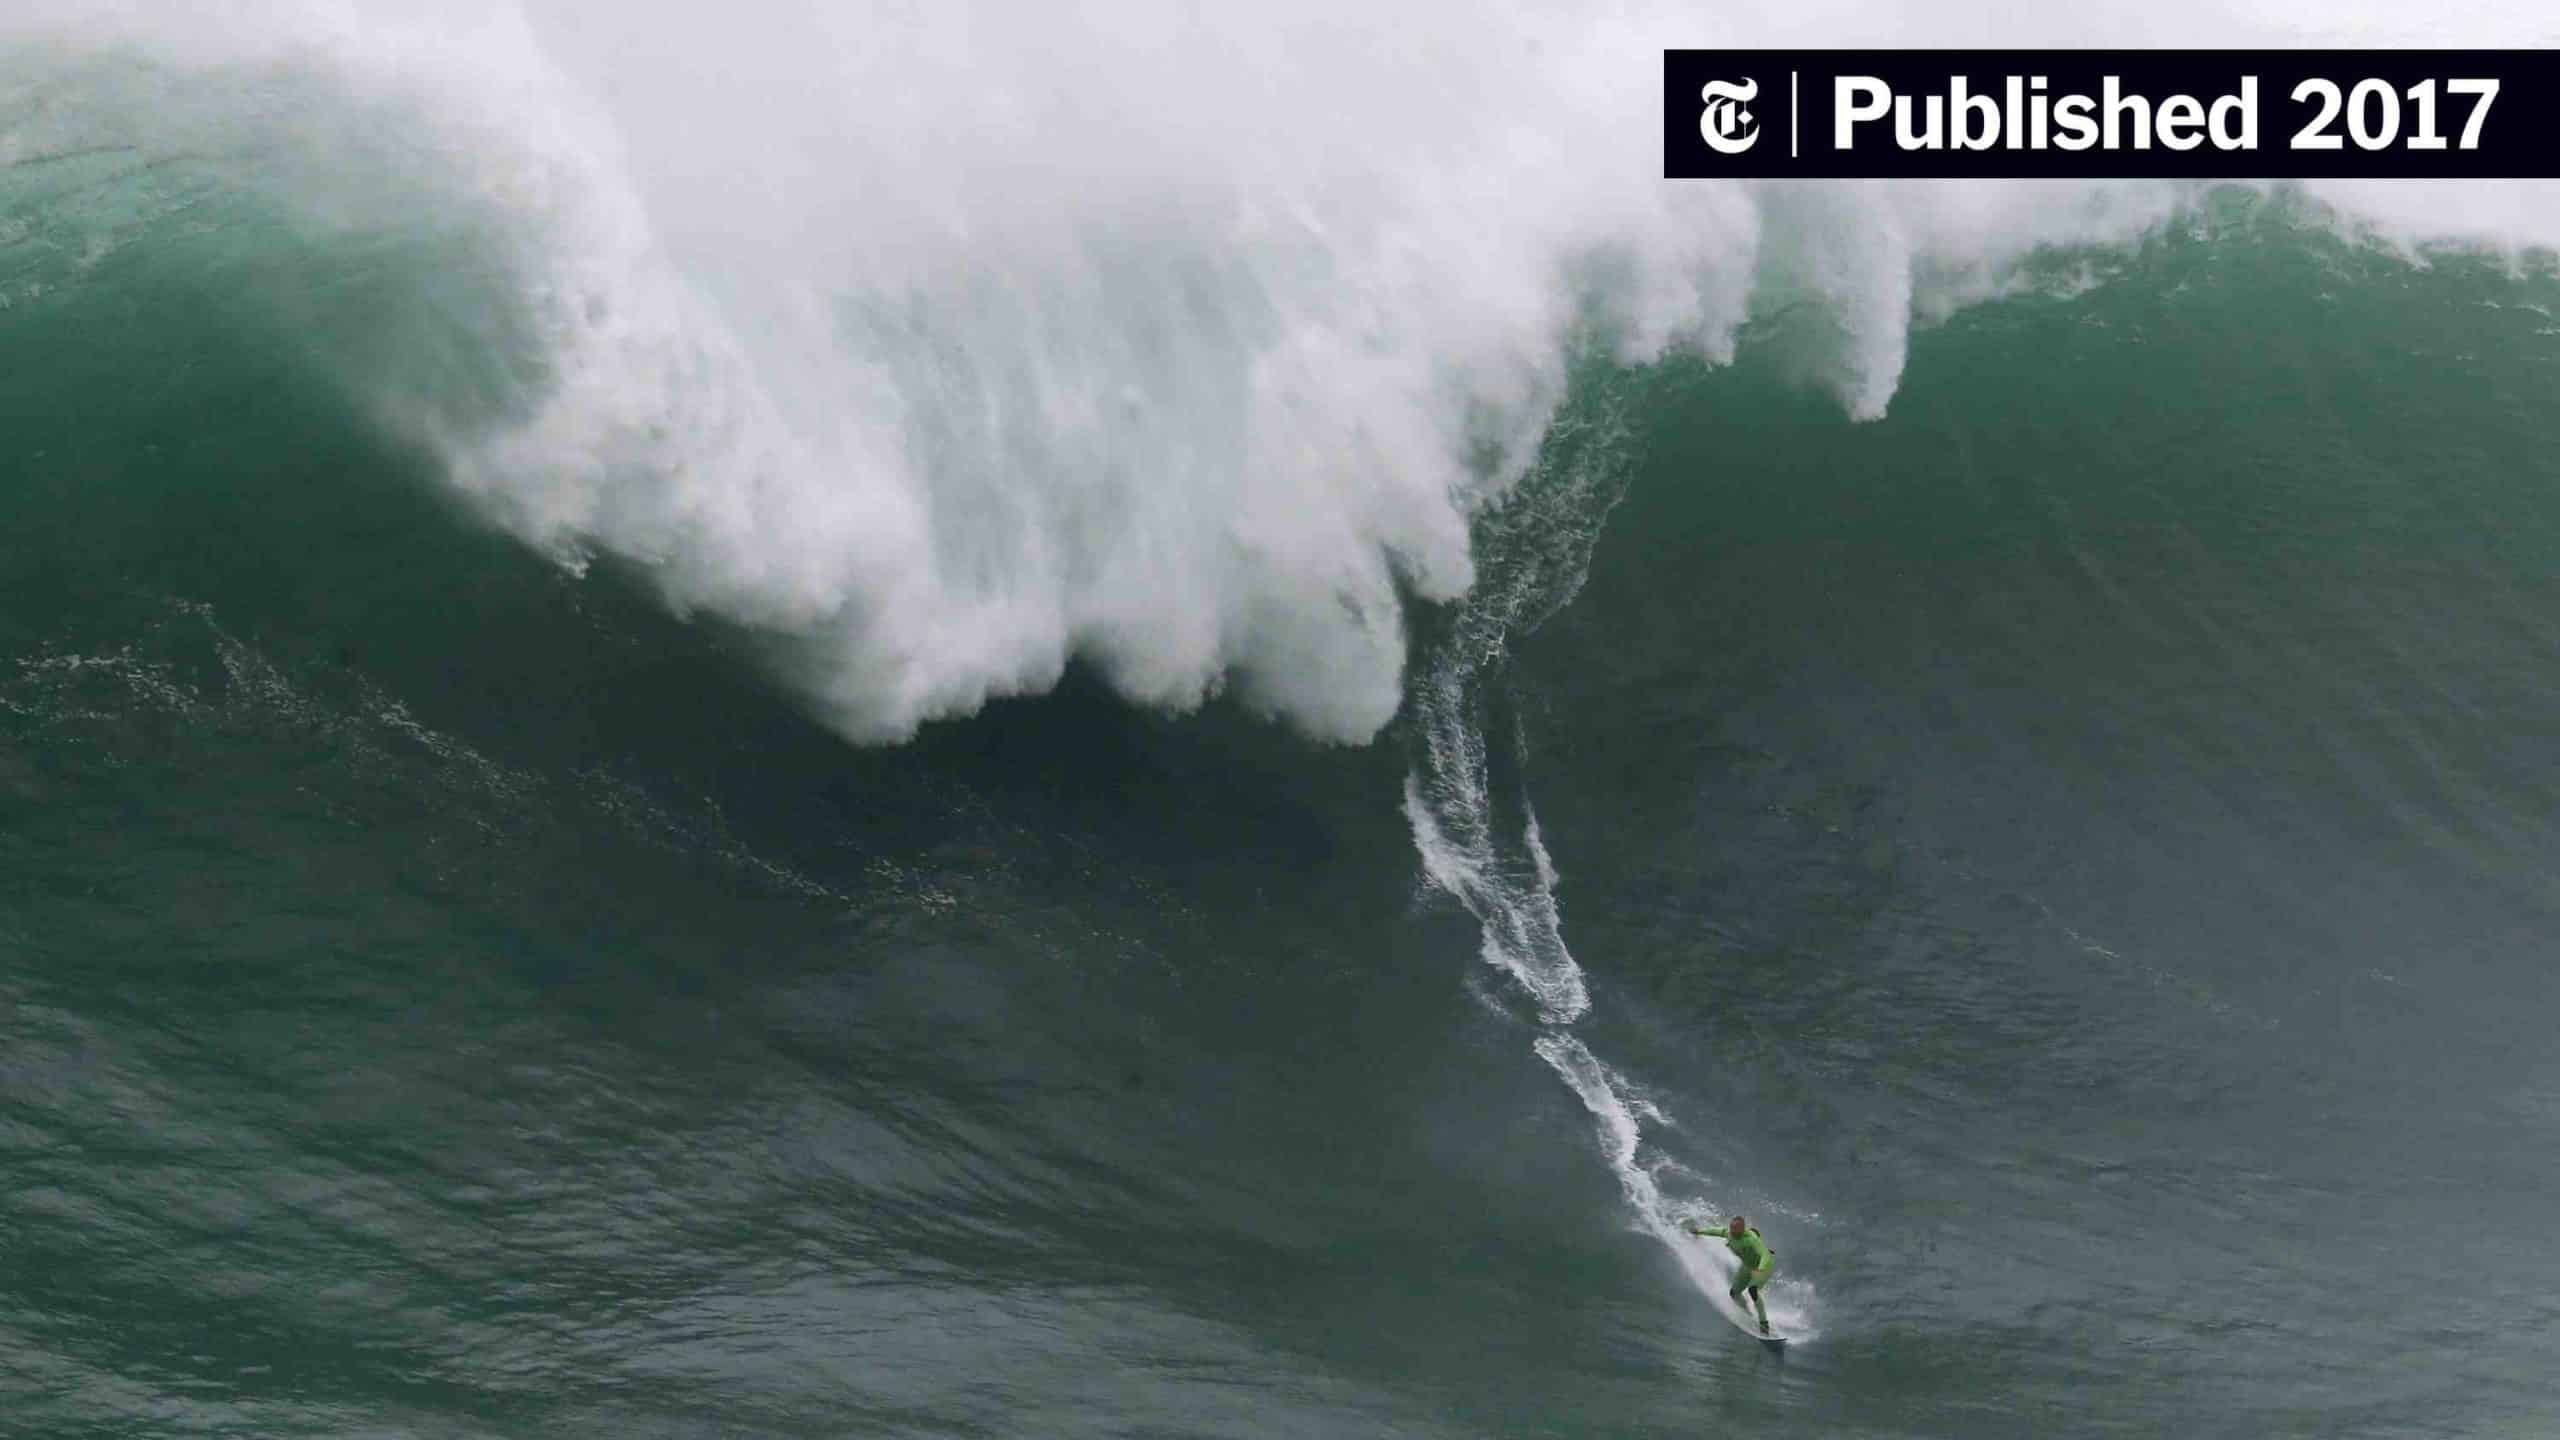 What is the safest way to wipeout in surfing?